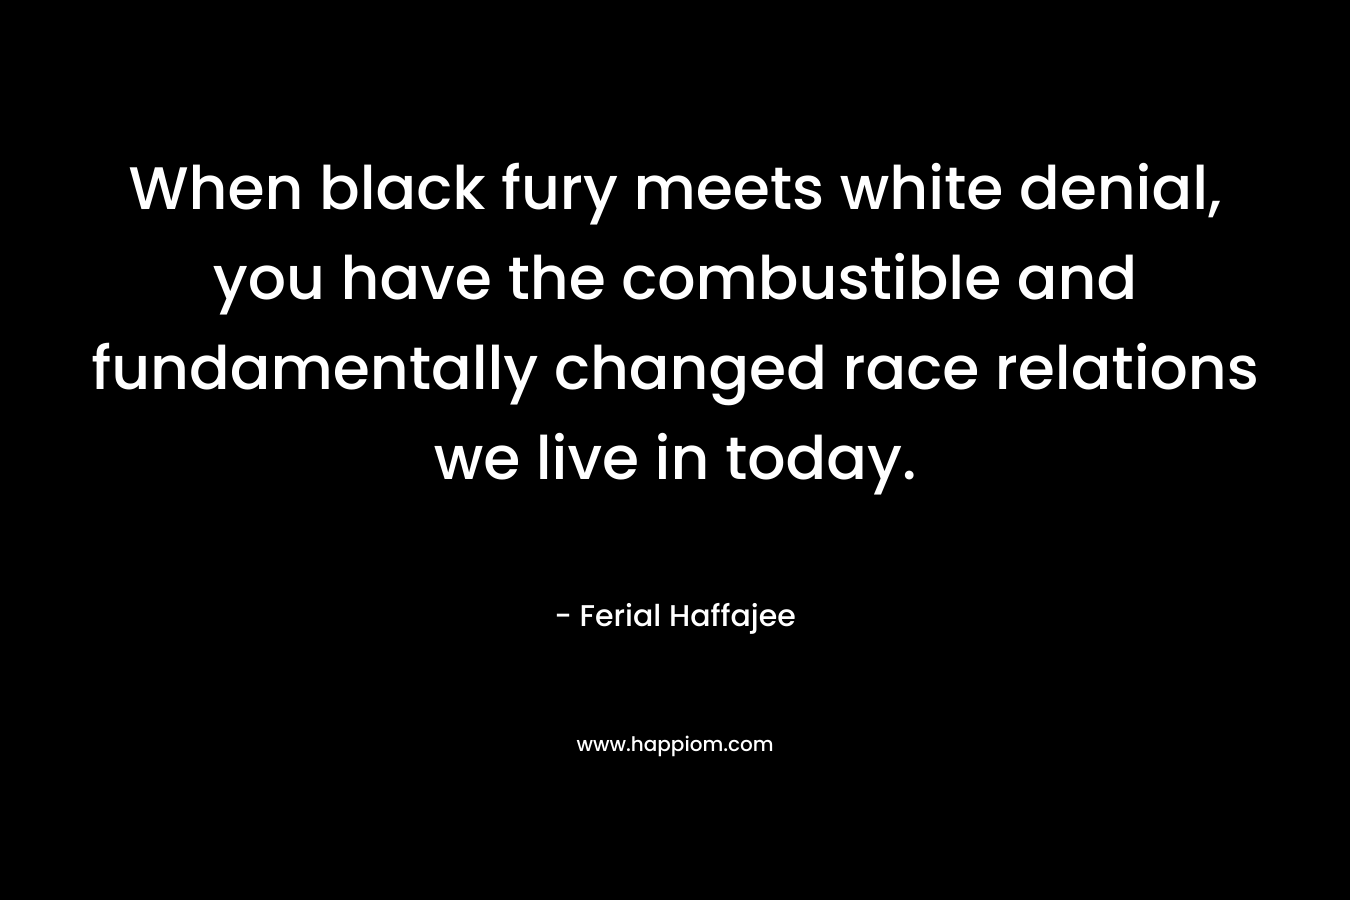 When black fury meets white denial, you have the combustible and fundamentally changed race relations we live in today. – Ferial Haffajee